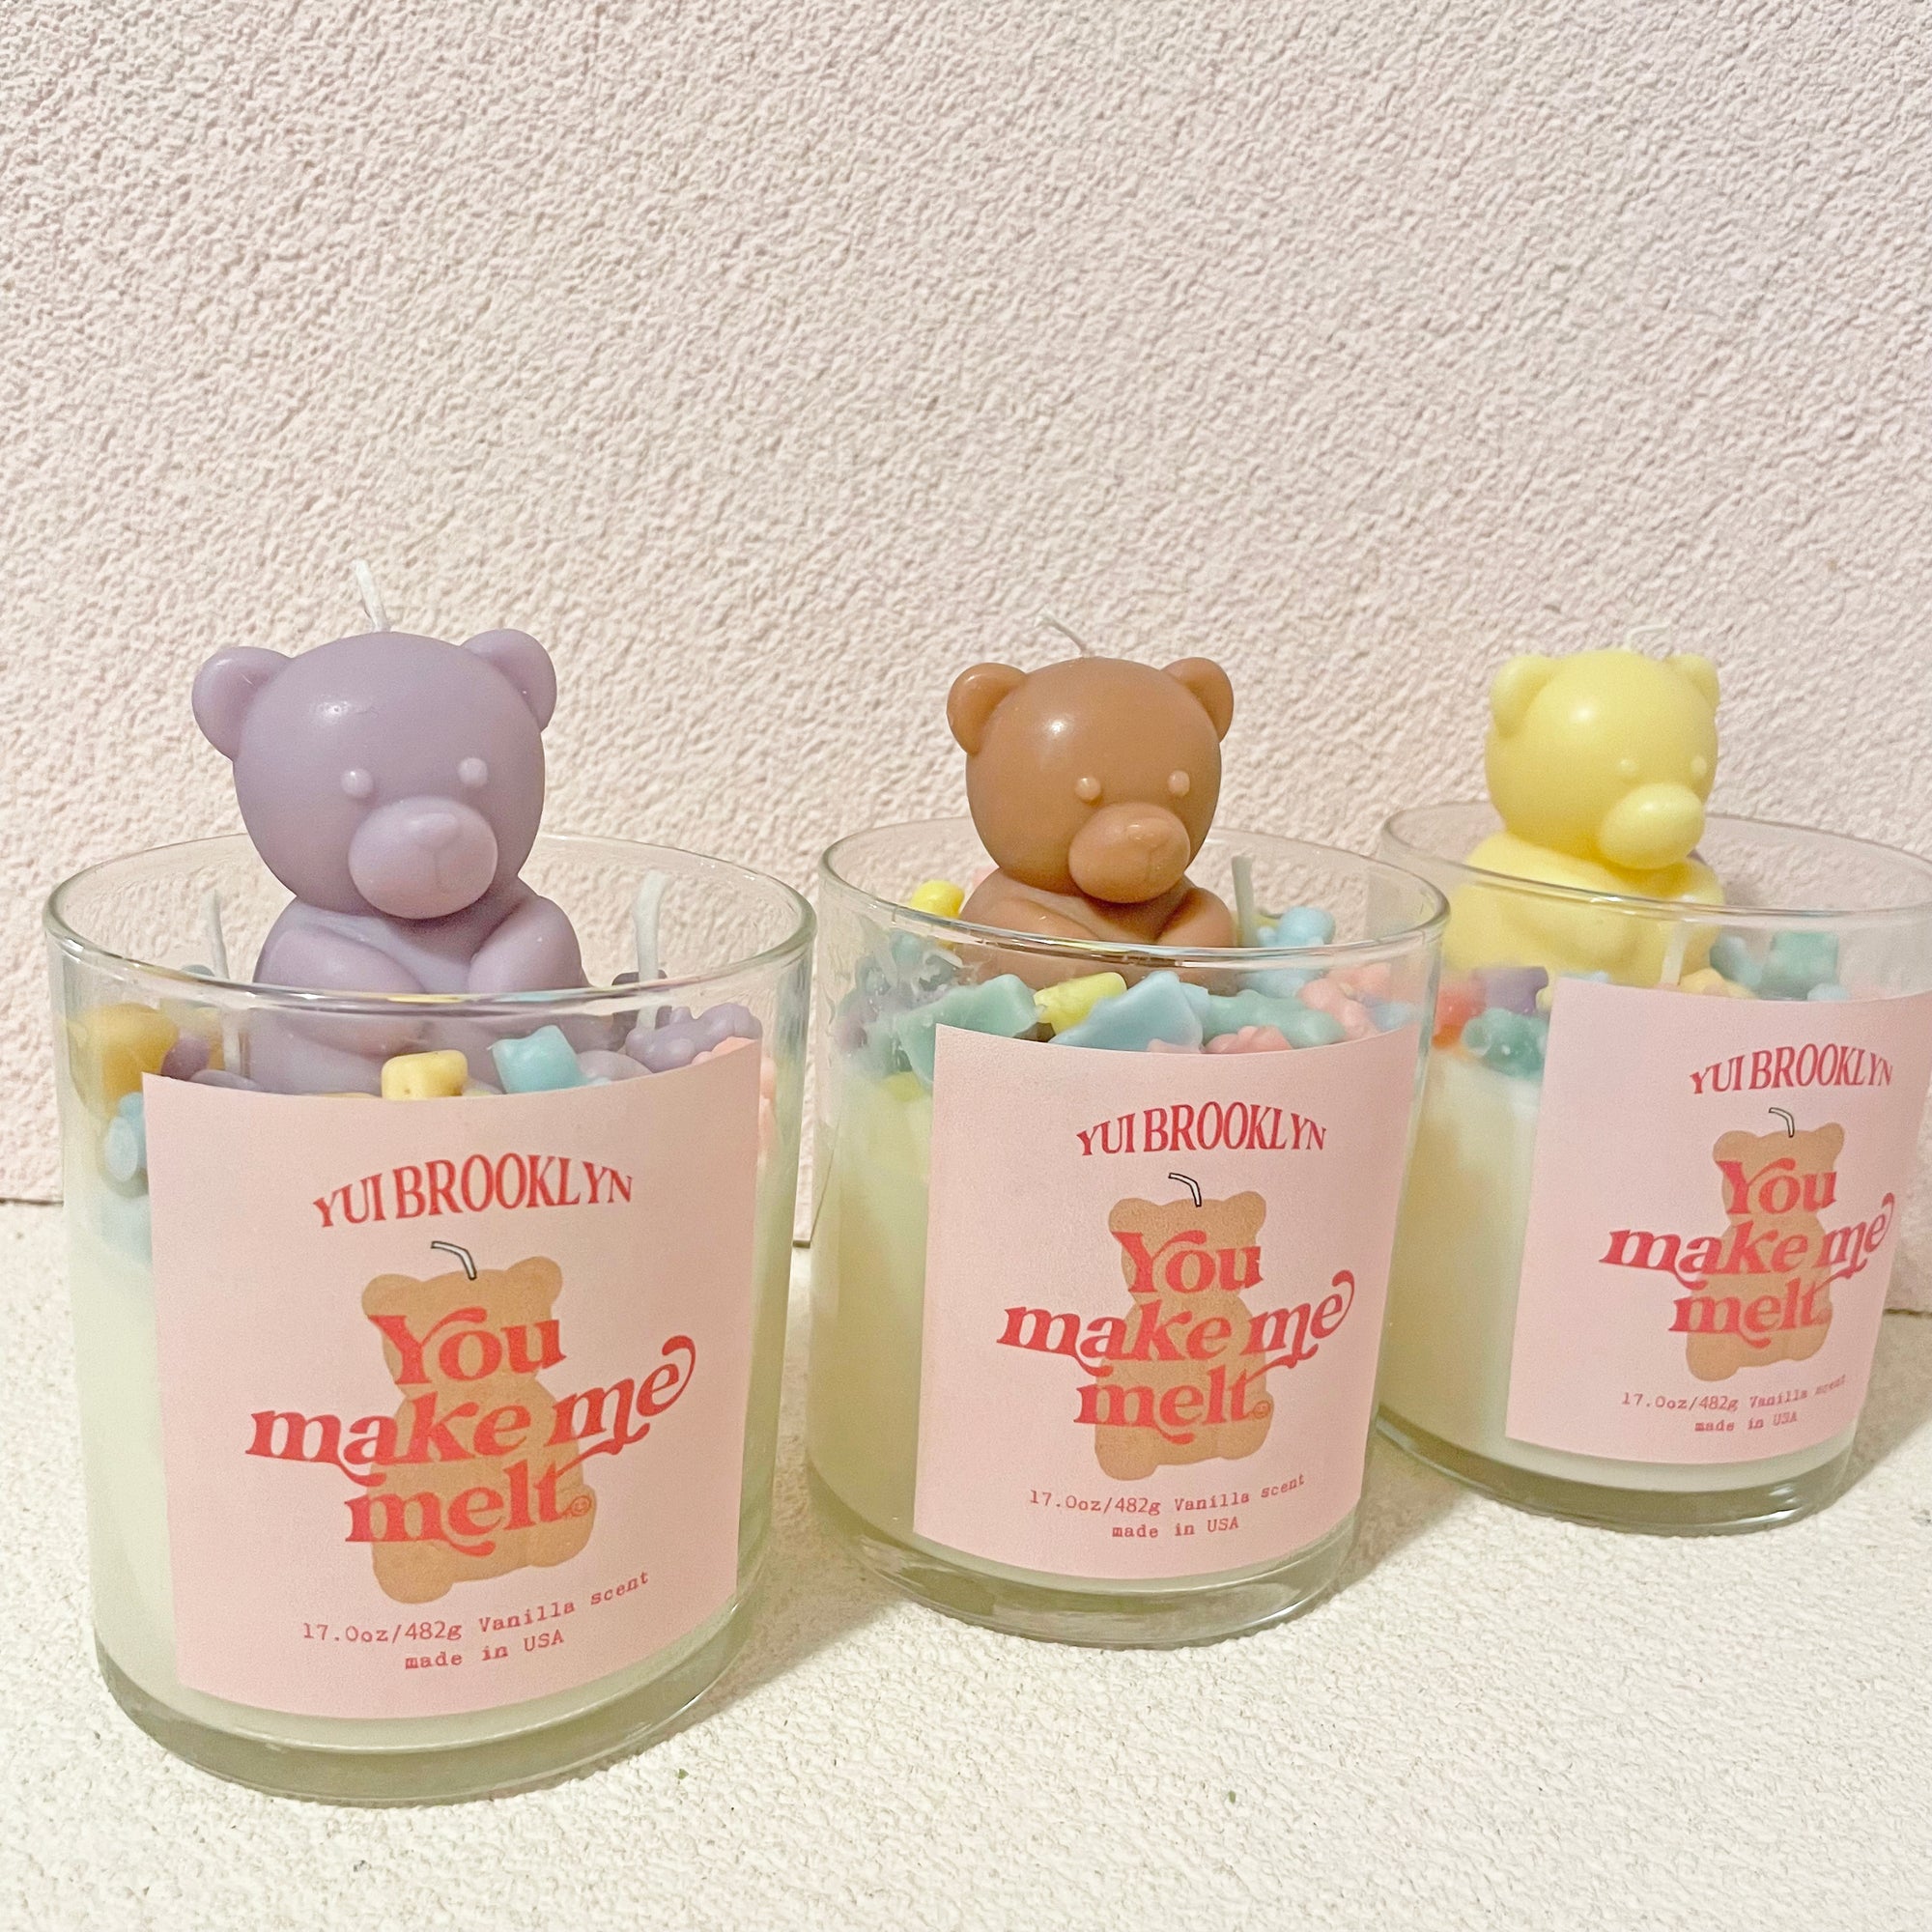 Scented Jar candle with Teddy bear on top  │ Soy Wax Candle